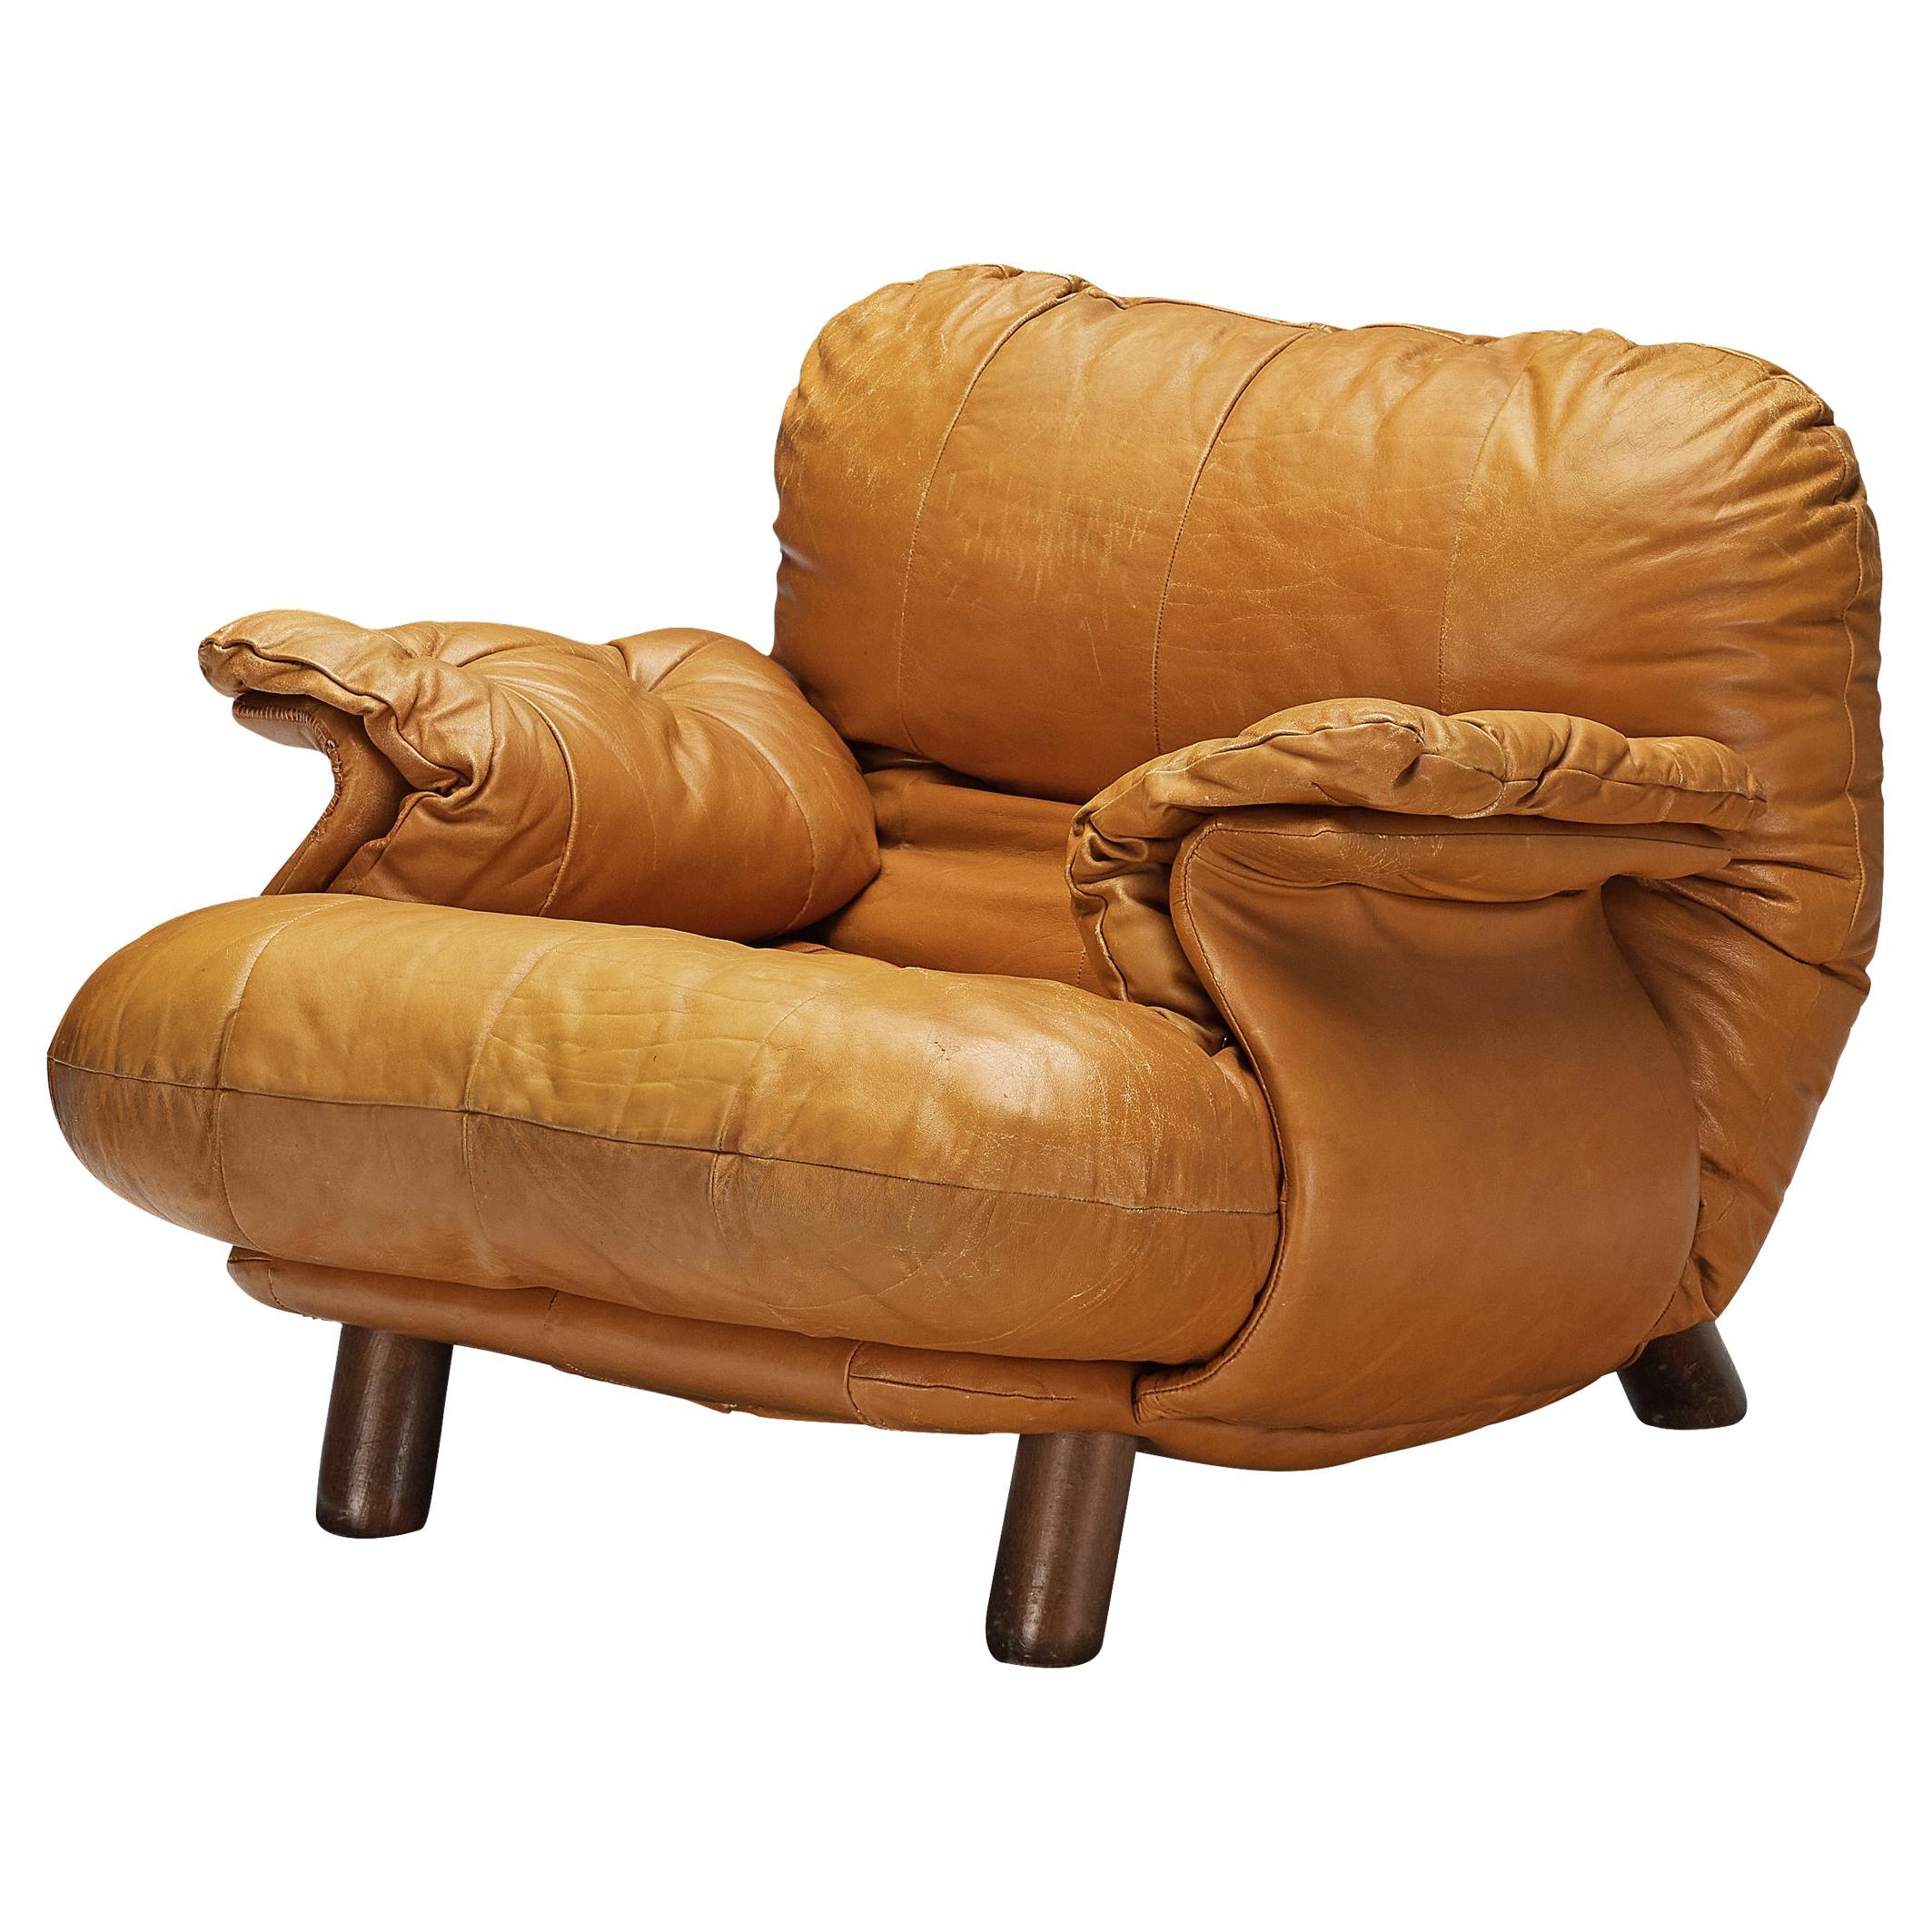 E. Cobianchi for Insa Italy Lounge Chair in Cognac Leather 